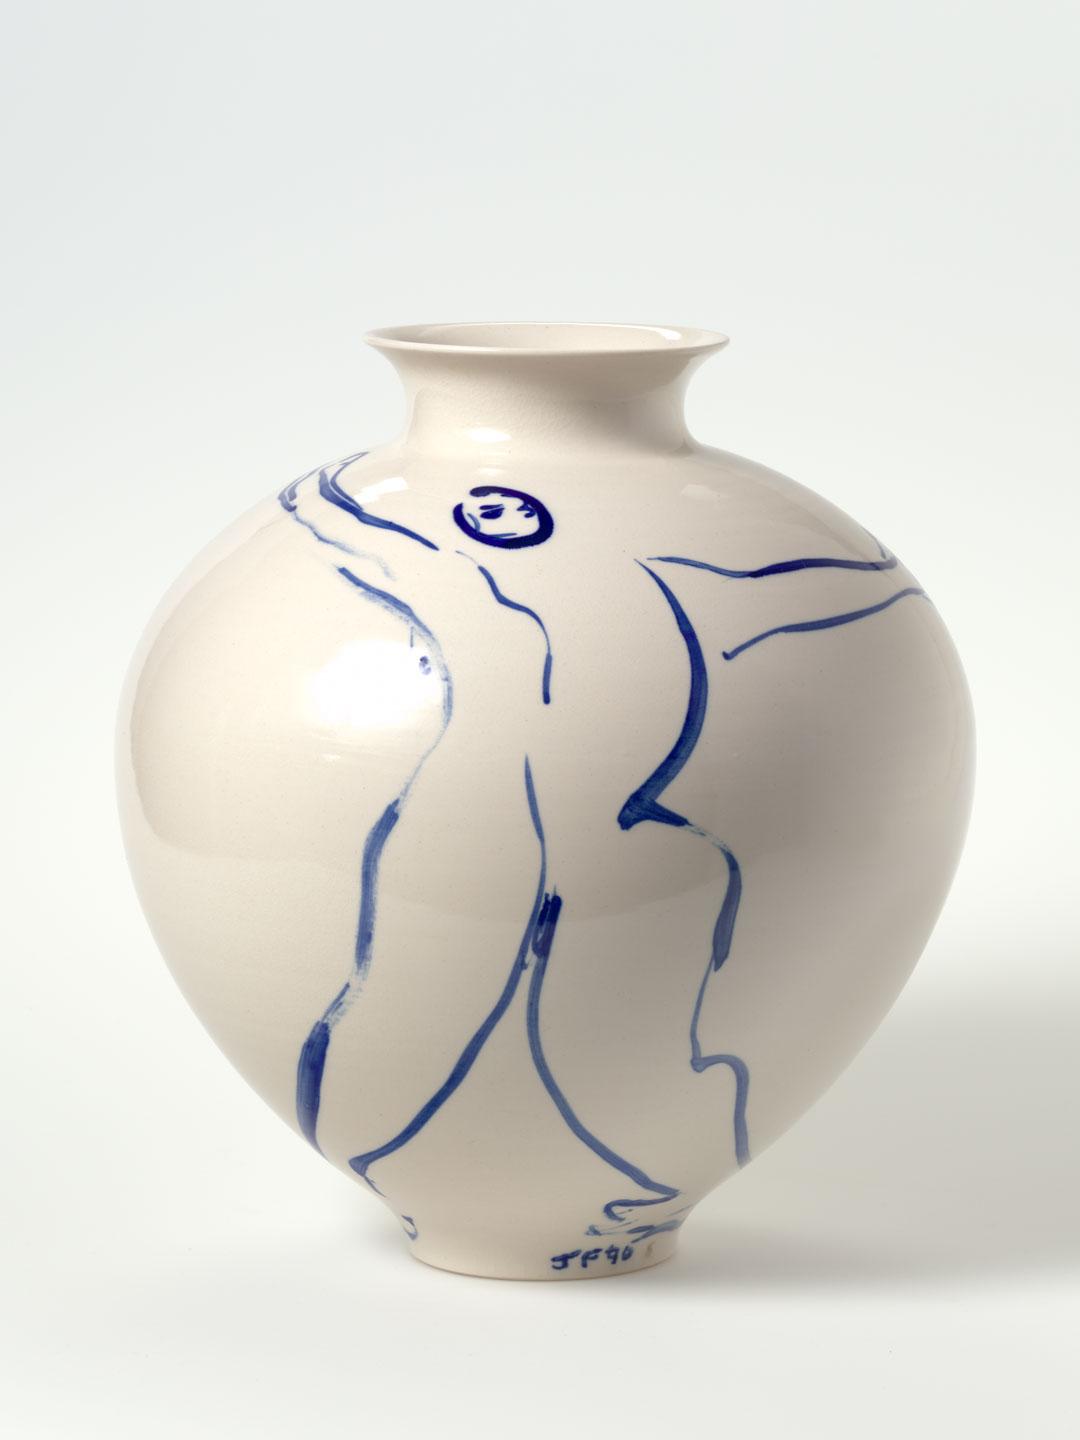 Artwork Figure this artwork made of Stoneware, white clay, wheelthrown with cobalt brushwork under clear glaze, created in 1990-01-01